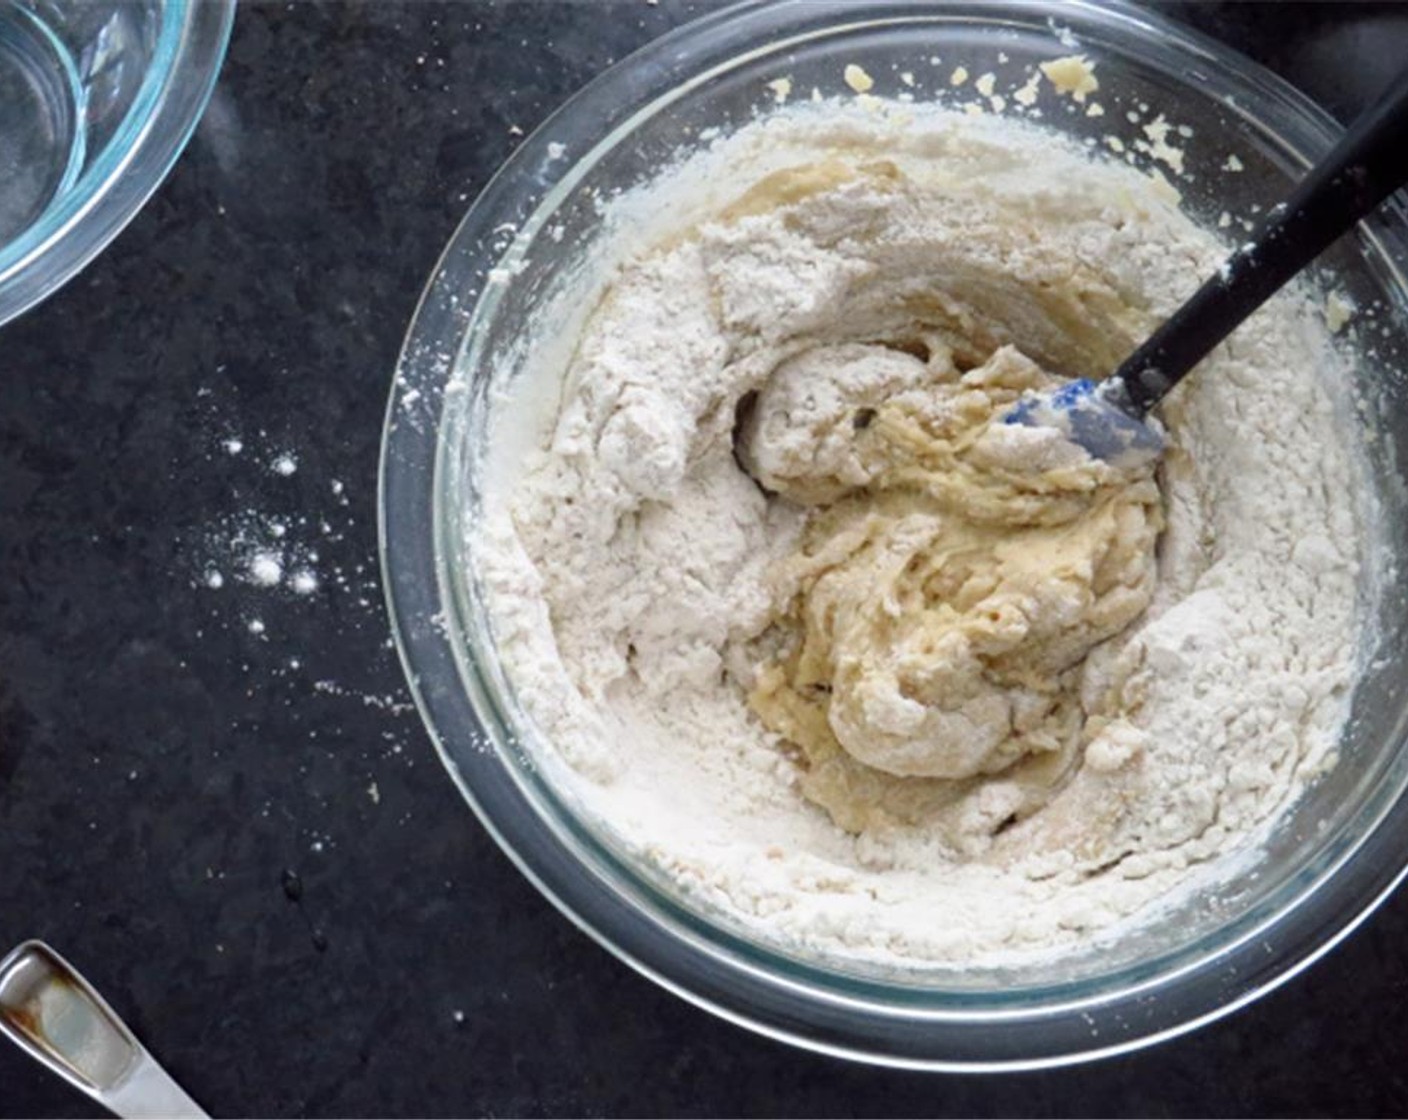 step 5 In a smaller bowl, combine all All-Purpose Flour (1 cup), Baking Soda (1/2 tsp), Salt (3/4 tsp) and Ground Cardamom (3/4 tsp). Whisk to blend. Add dry ingredients to butter mixture in 3 additions, mixing thoroughly after each.